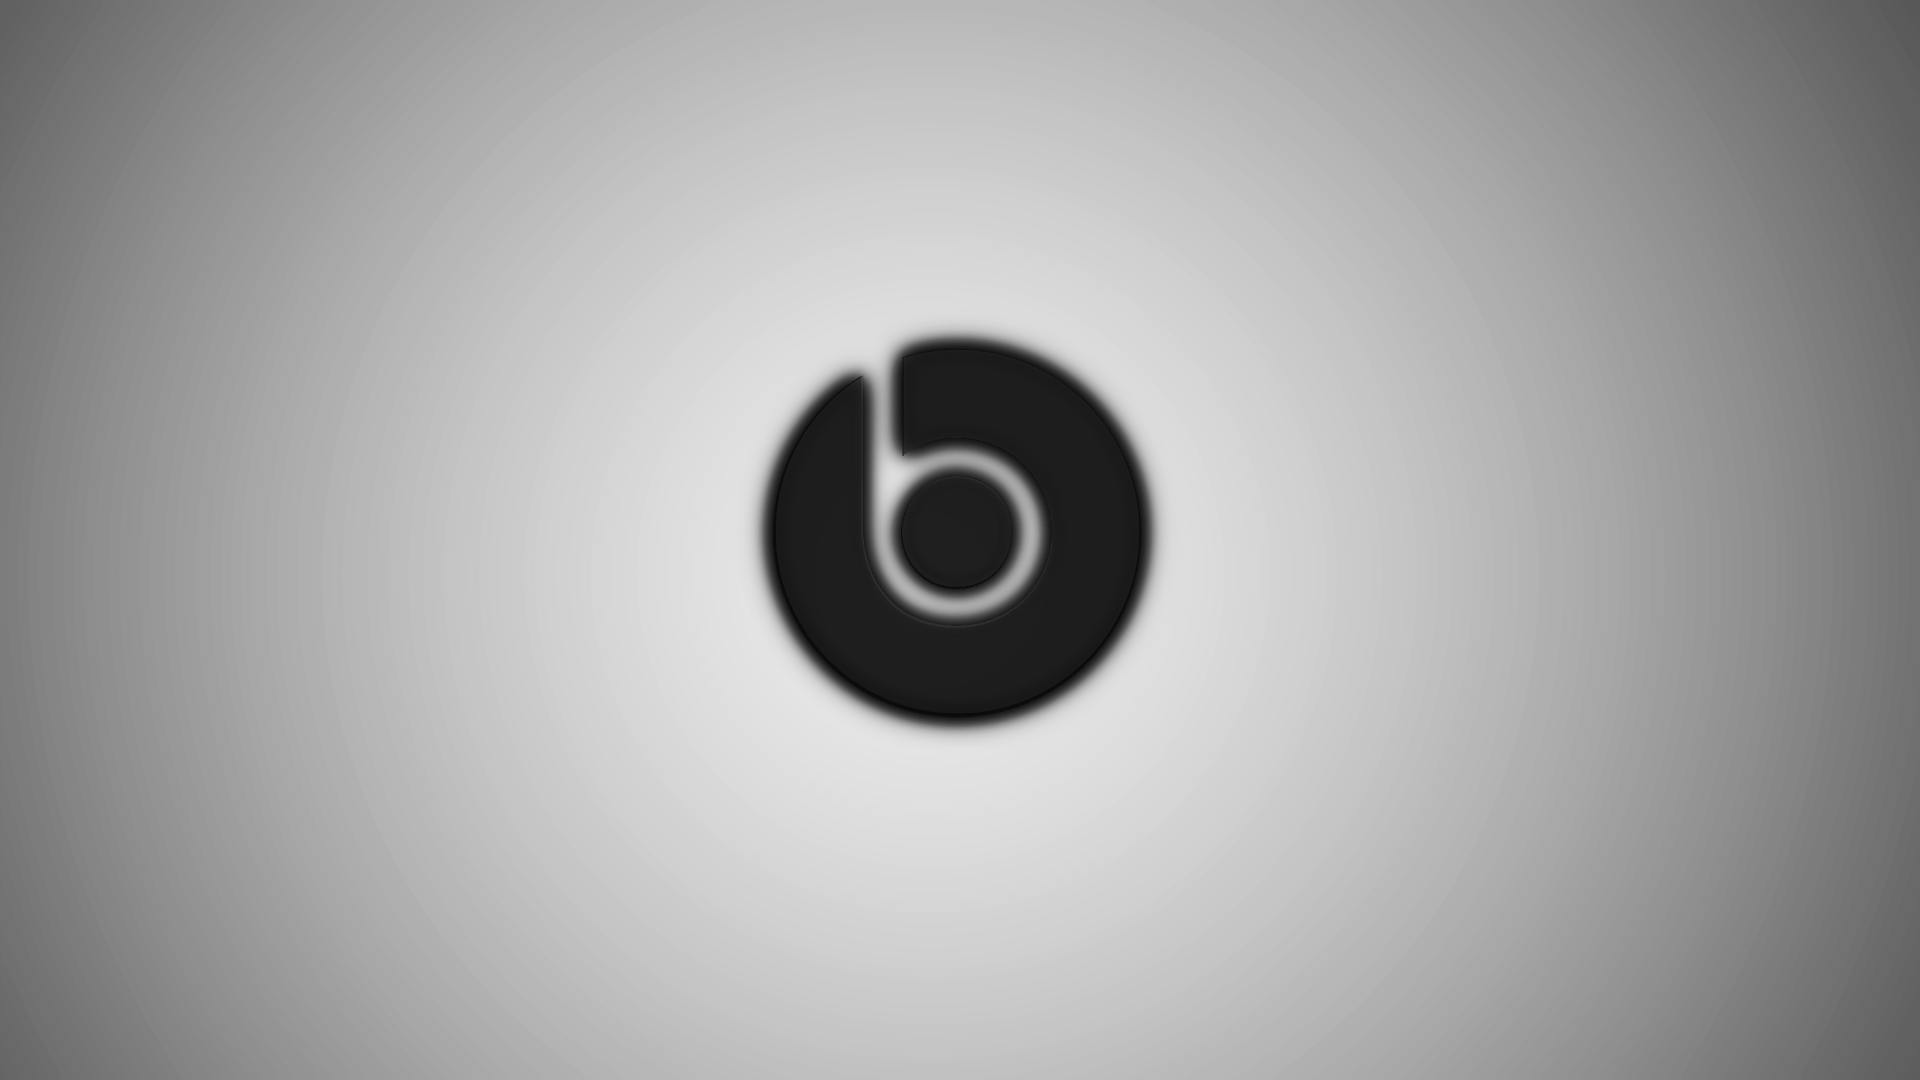 Black Beats by Dre Logo - Beats By Dr. Dre Wallpapers - Wallpaper Cave